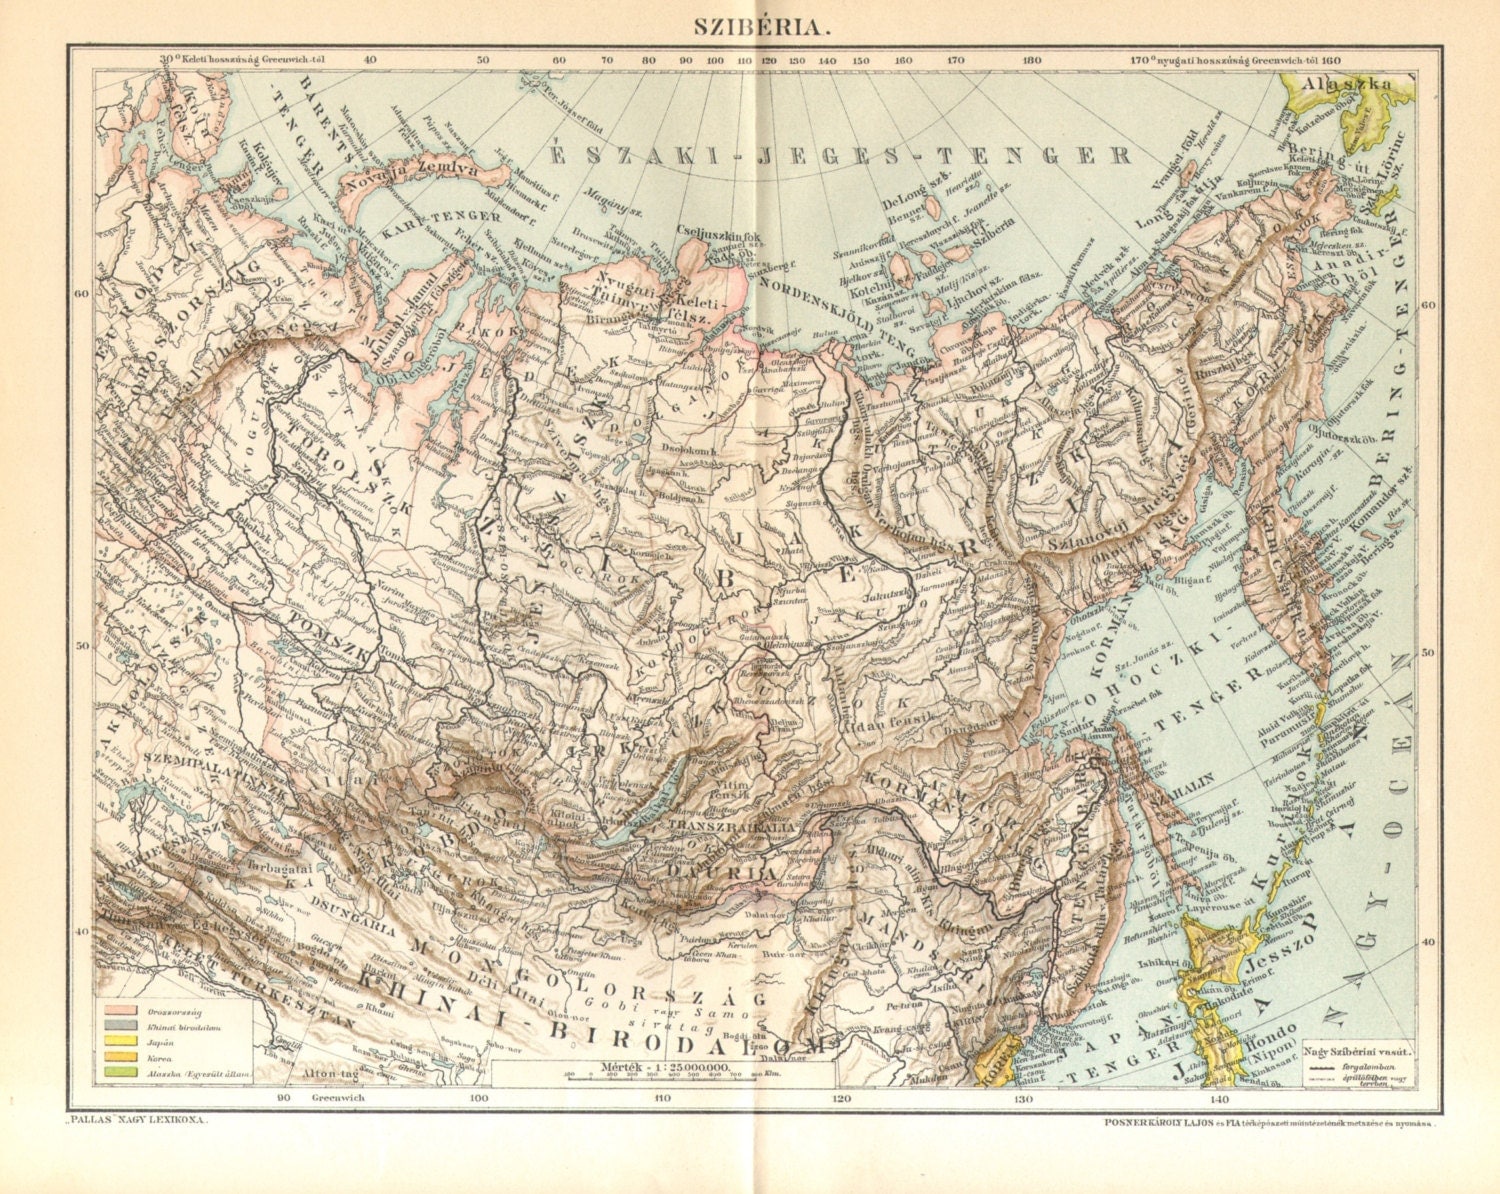 1897 Map of Siberia Russian Empire at the end of the 19th